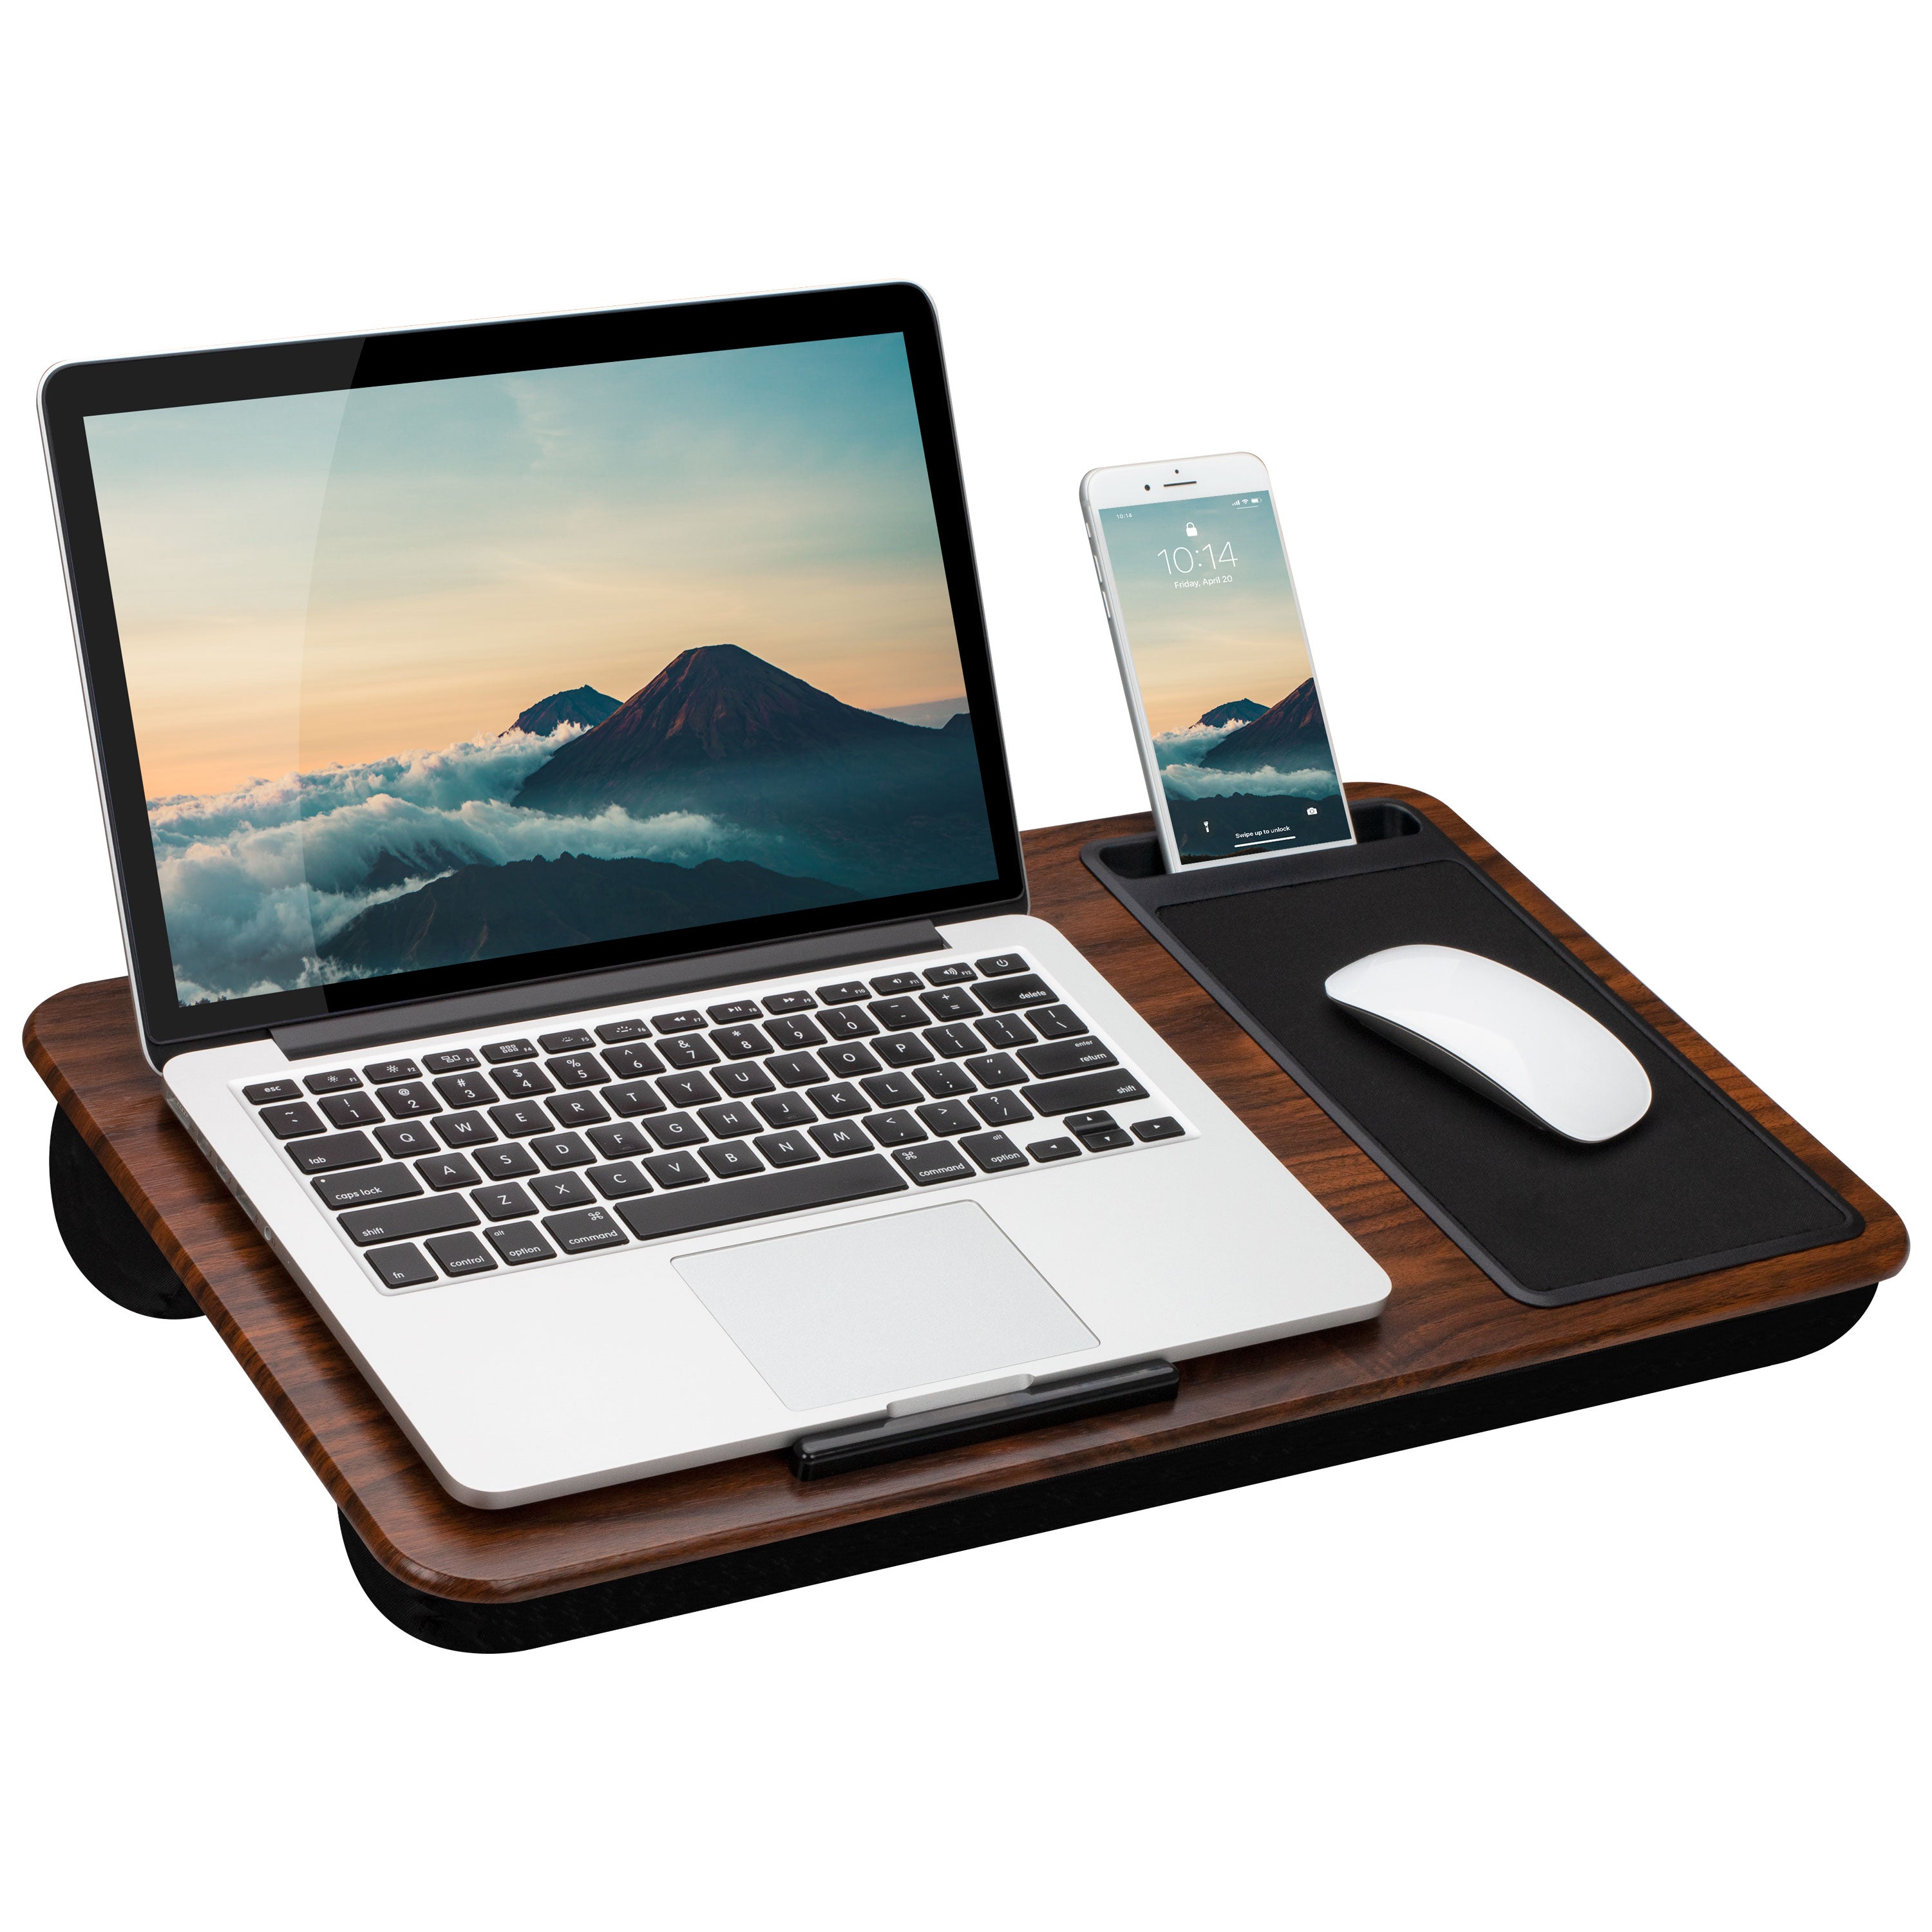 LapGear Home Office Lap Desk with Mouse Pad and Phone Holder, 21.1" x 12", Multiple Colors - image 1 of 6